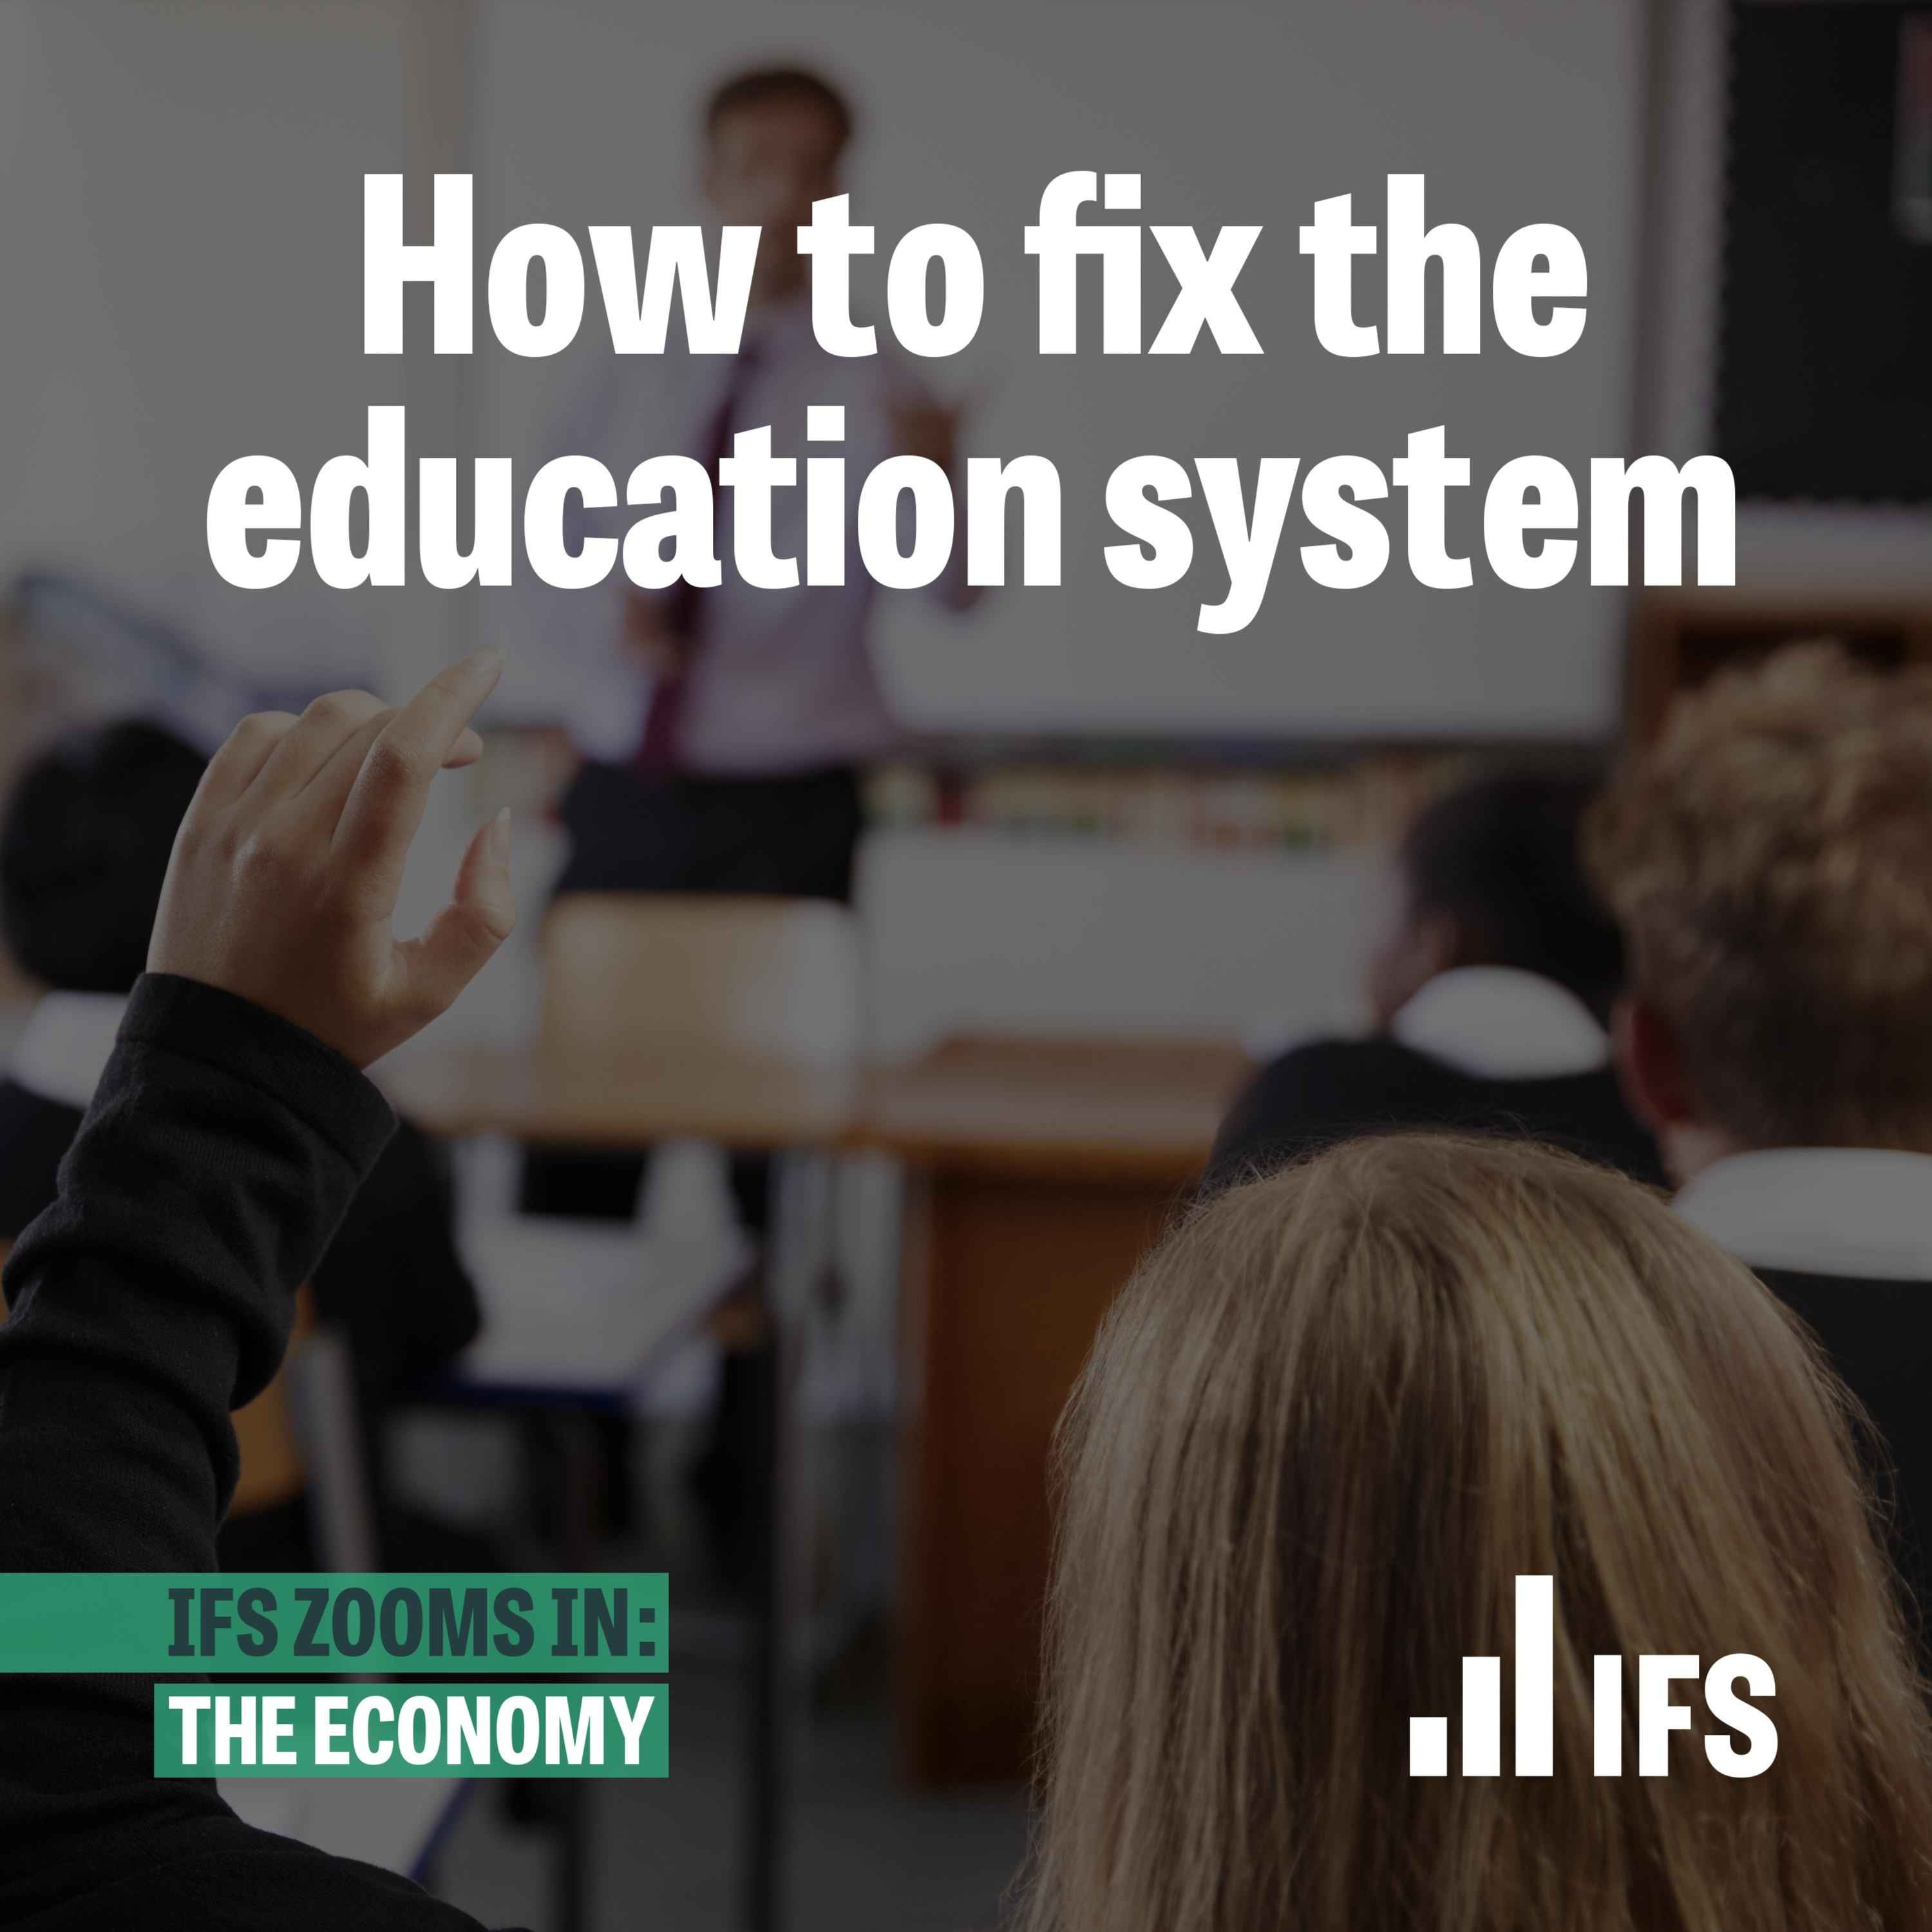 How to fix the education system